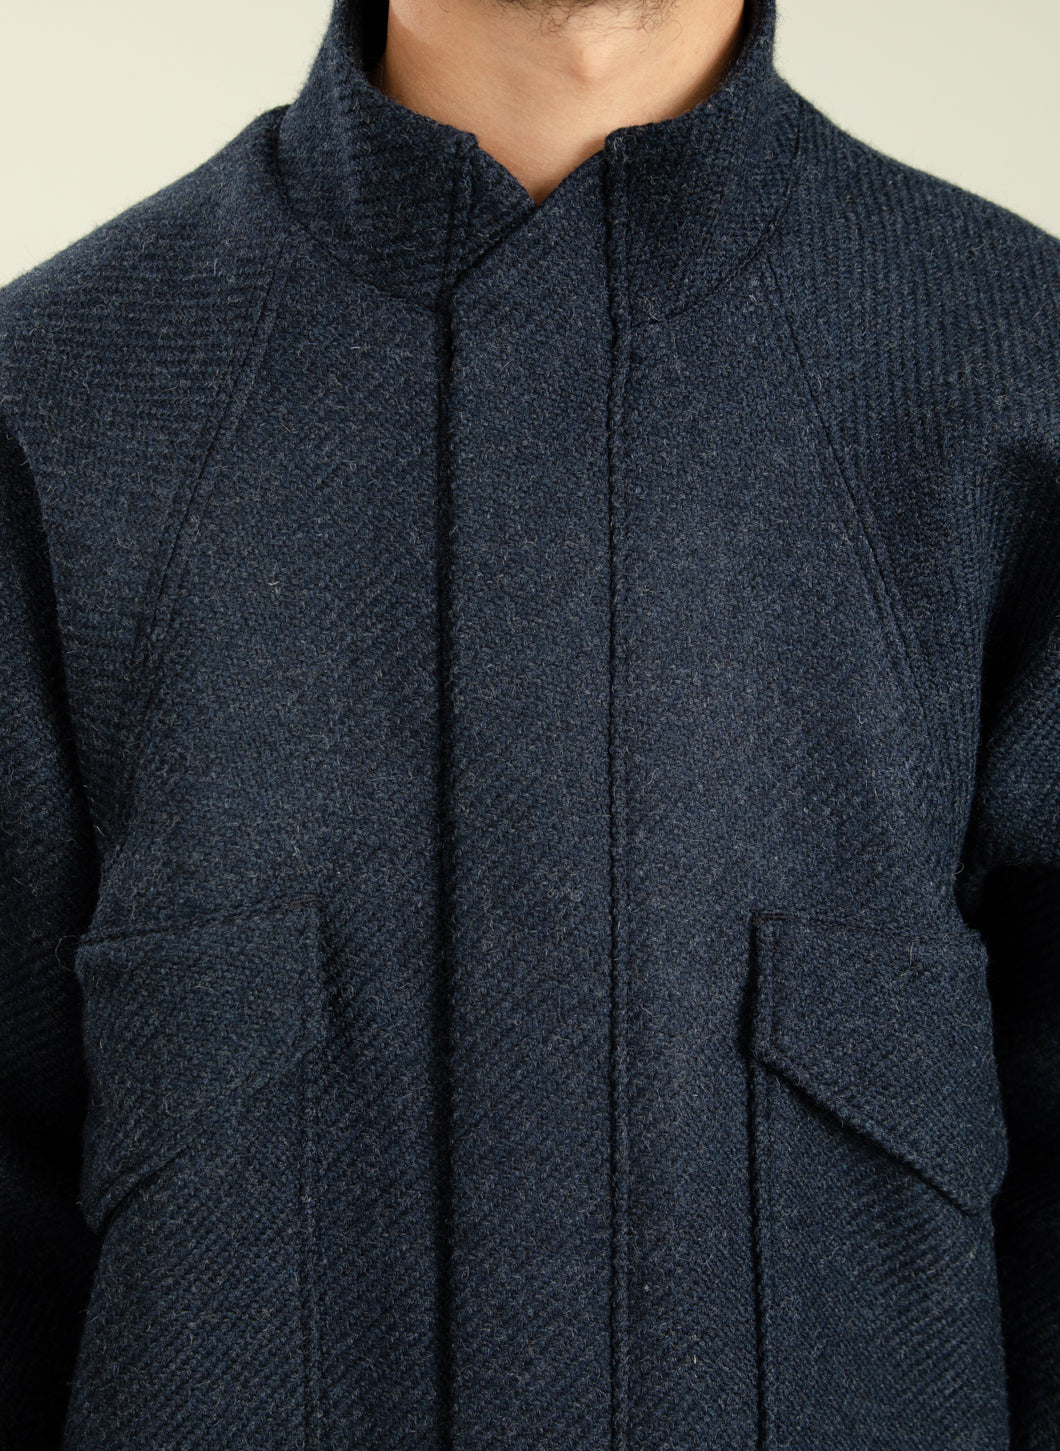 Bomber Jacket with Origami Collar in Navy Blue Italian Wool